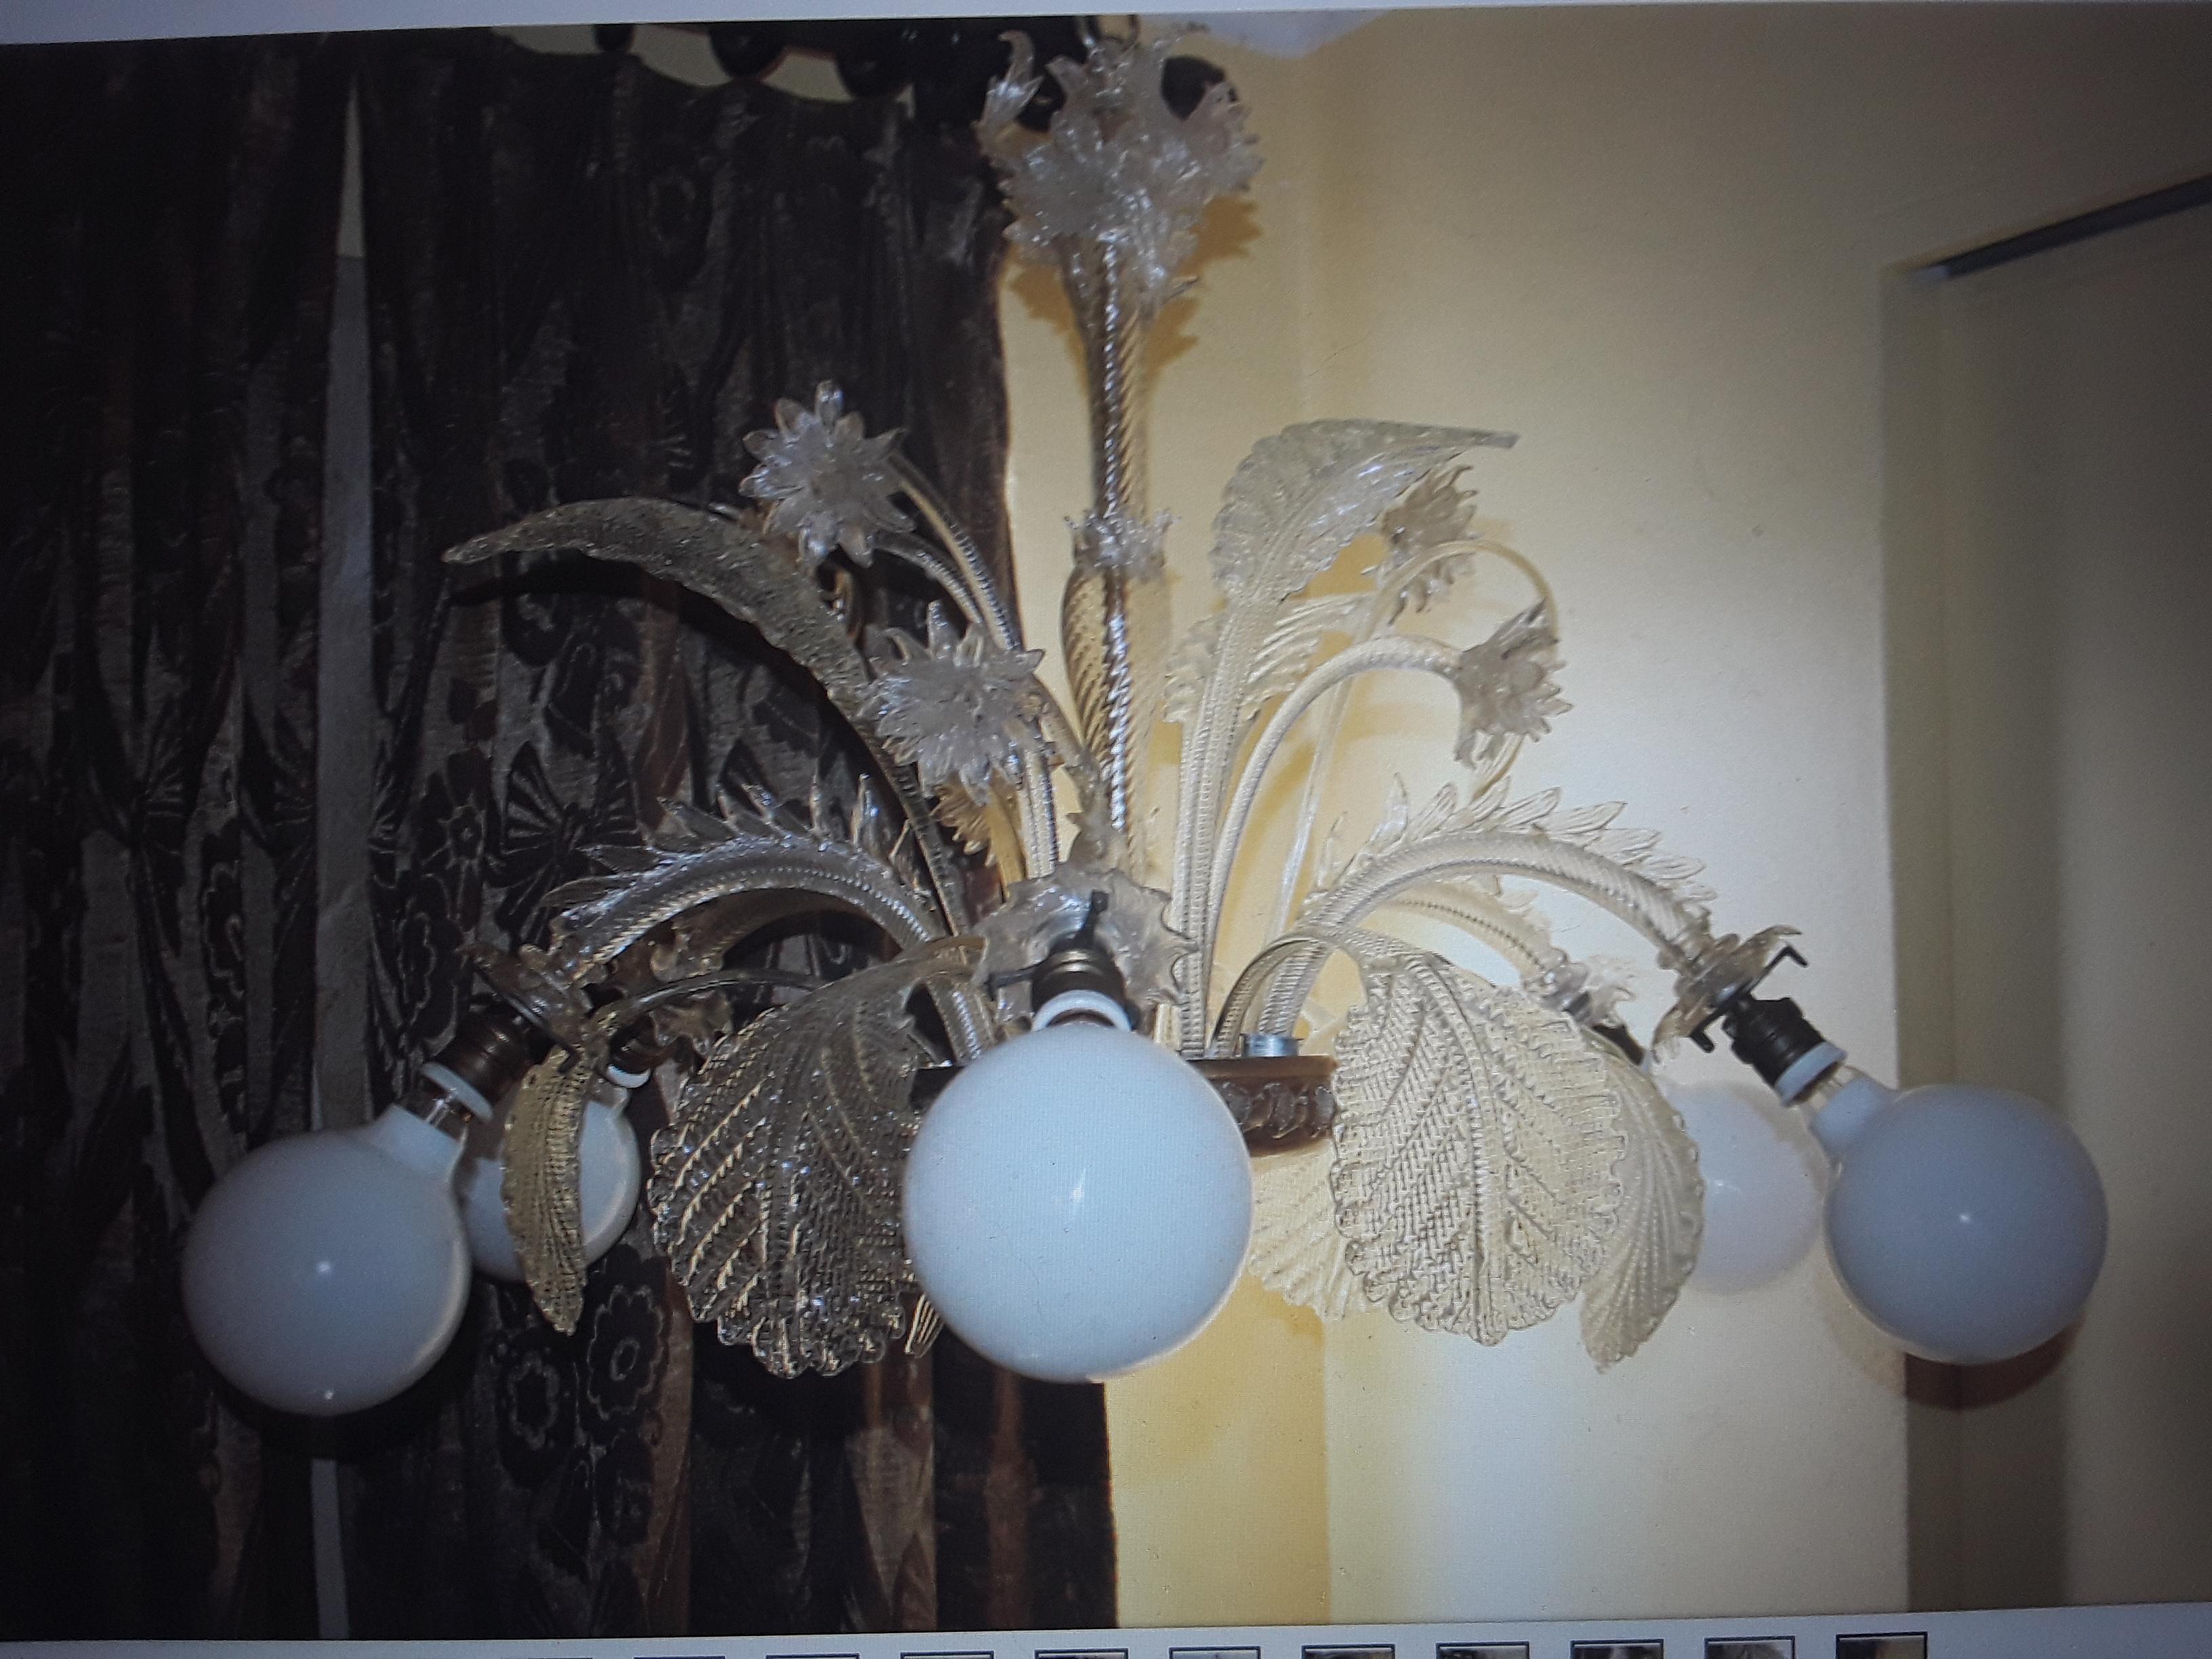 Showstopping c1950's Italian Mid Century Modern Large Floral Display in Clear and Patterned Art Glass Chandelier. This is a beauty! Miami Beach Estate. Nips and some chips here and there that is normal for a fixture of this type, not detracting.